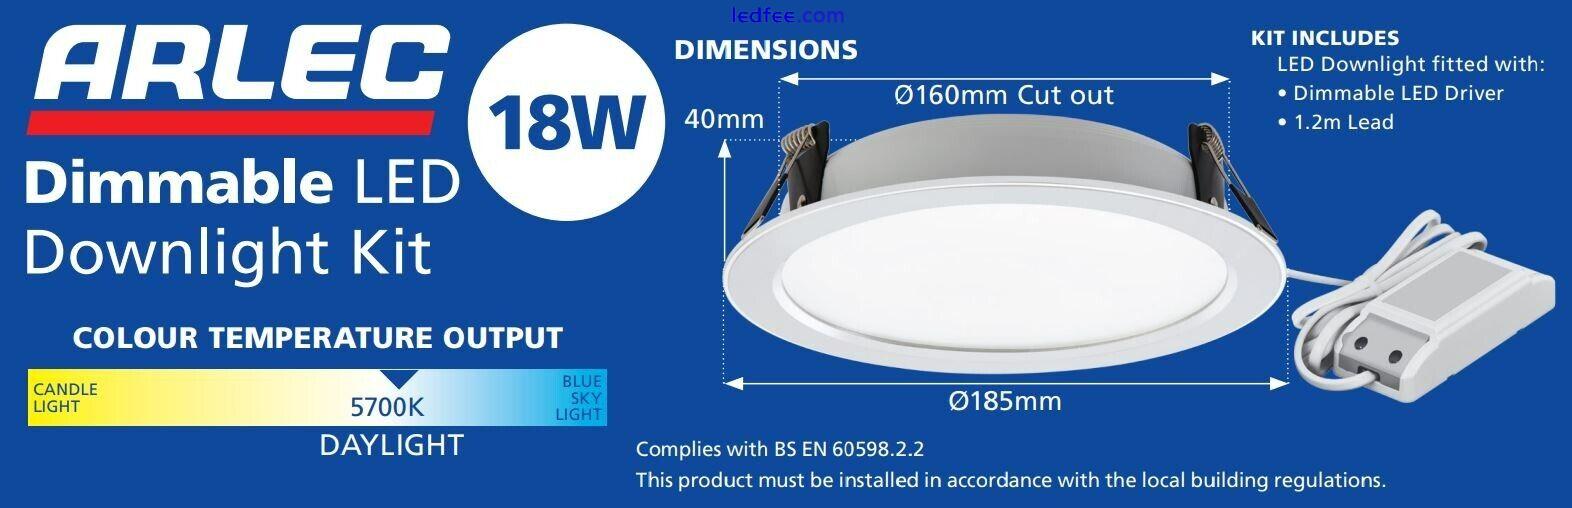 Recessed Dimmable LED Downlight Kit - 1PK - 18W Daylight Spotlight Ceiling 1 